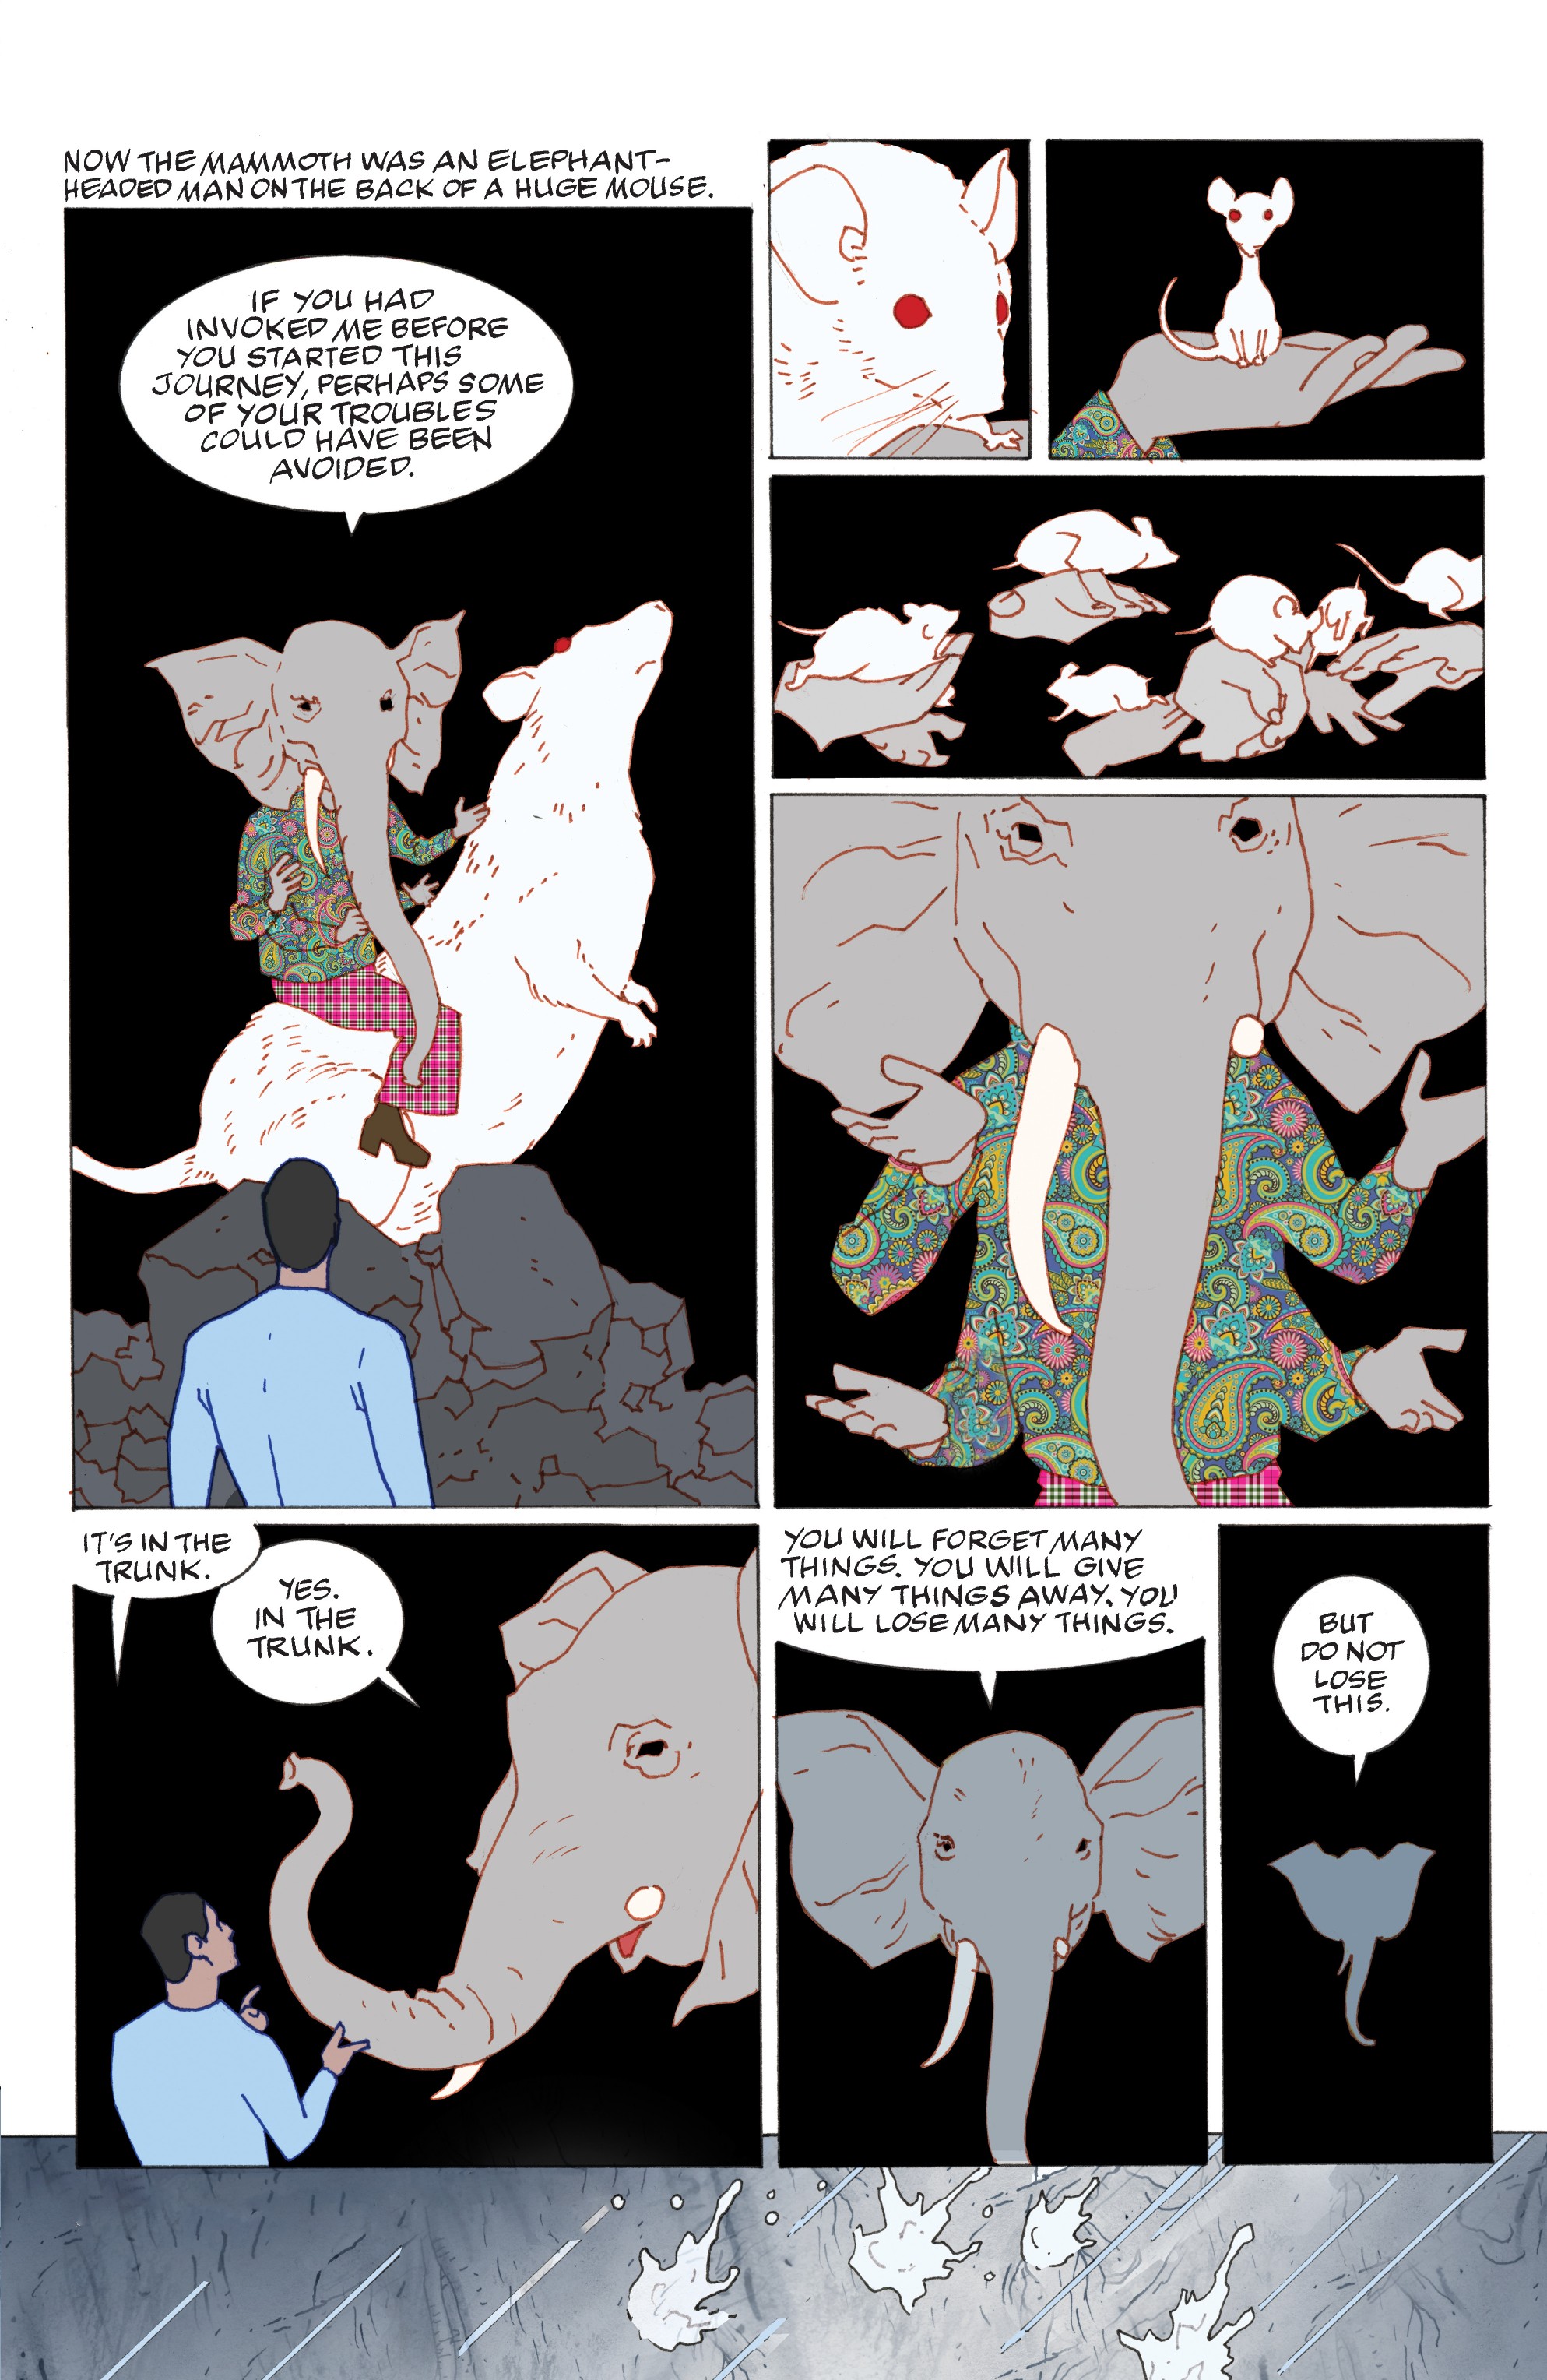 American Gods: The Moment of the Storm (2019): Chapter 3 - Page 5